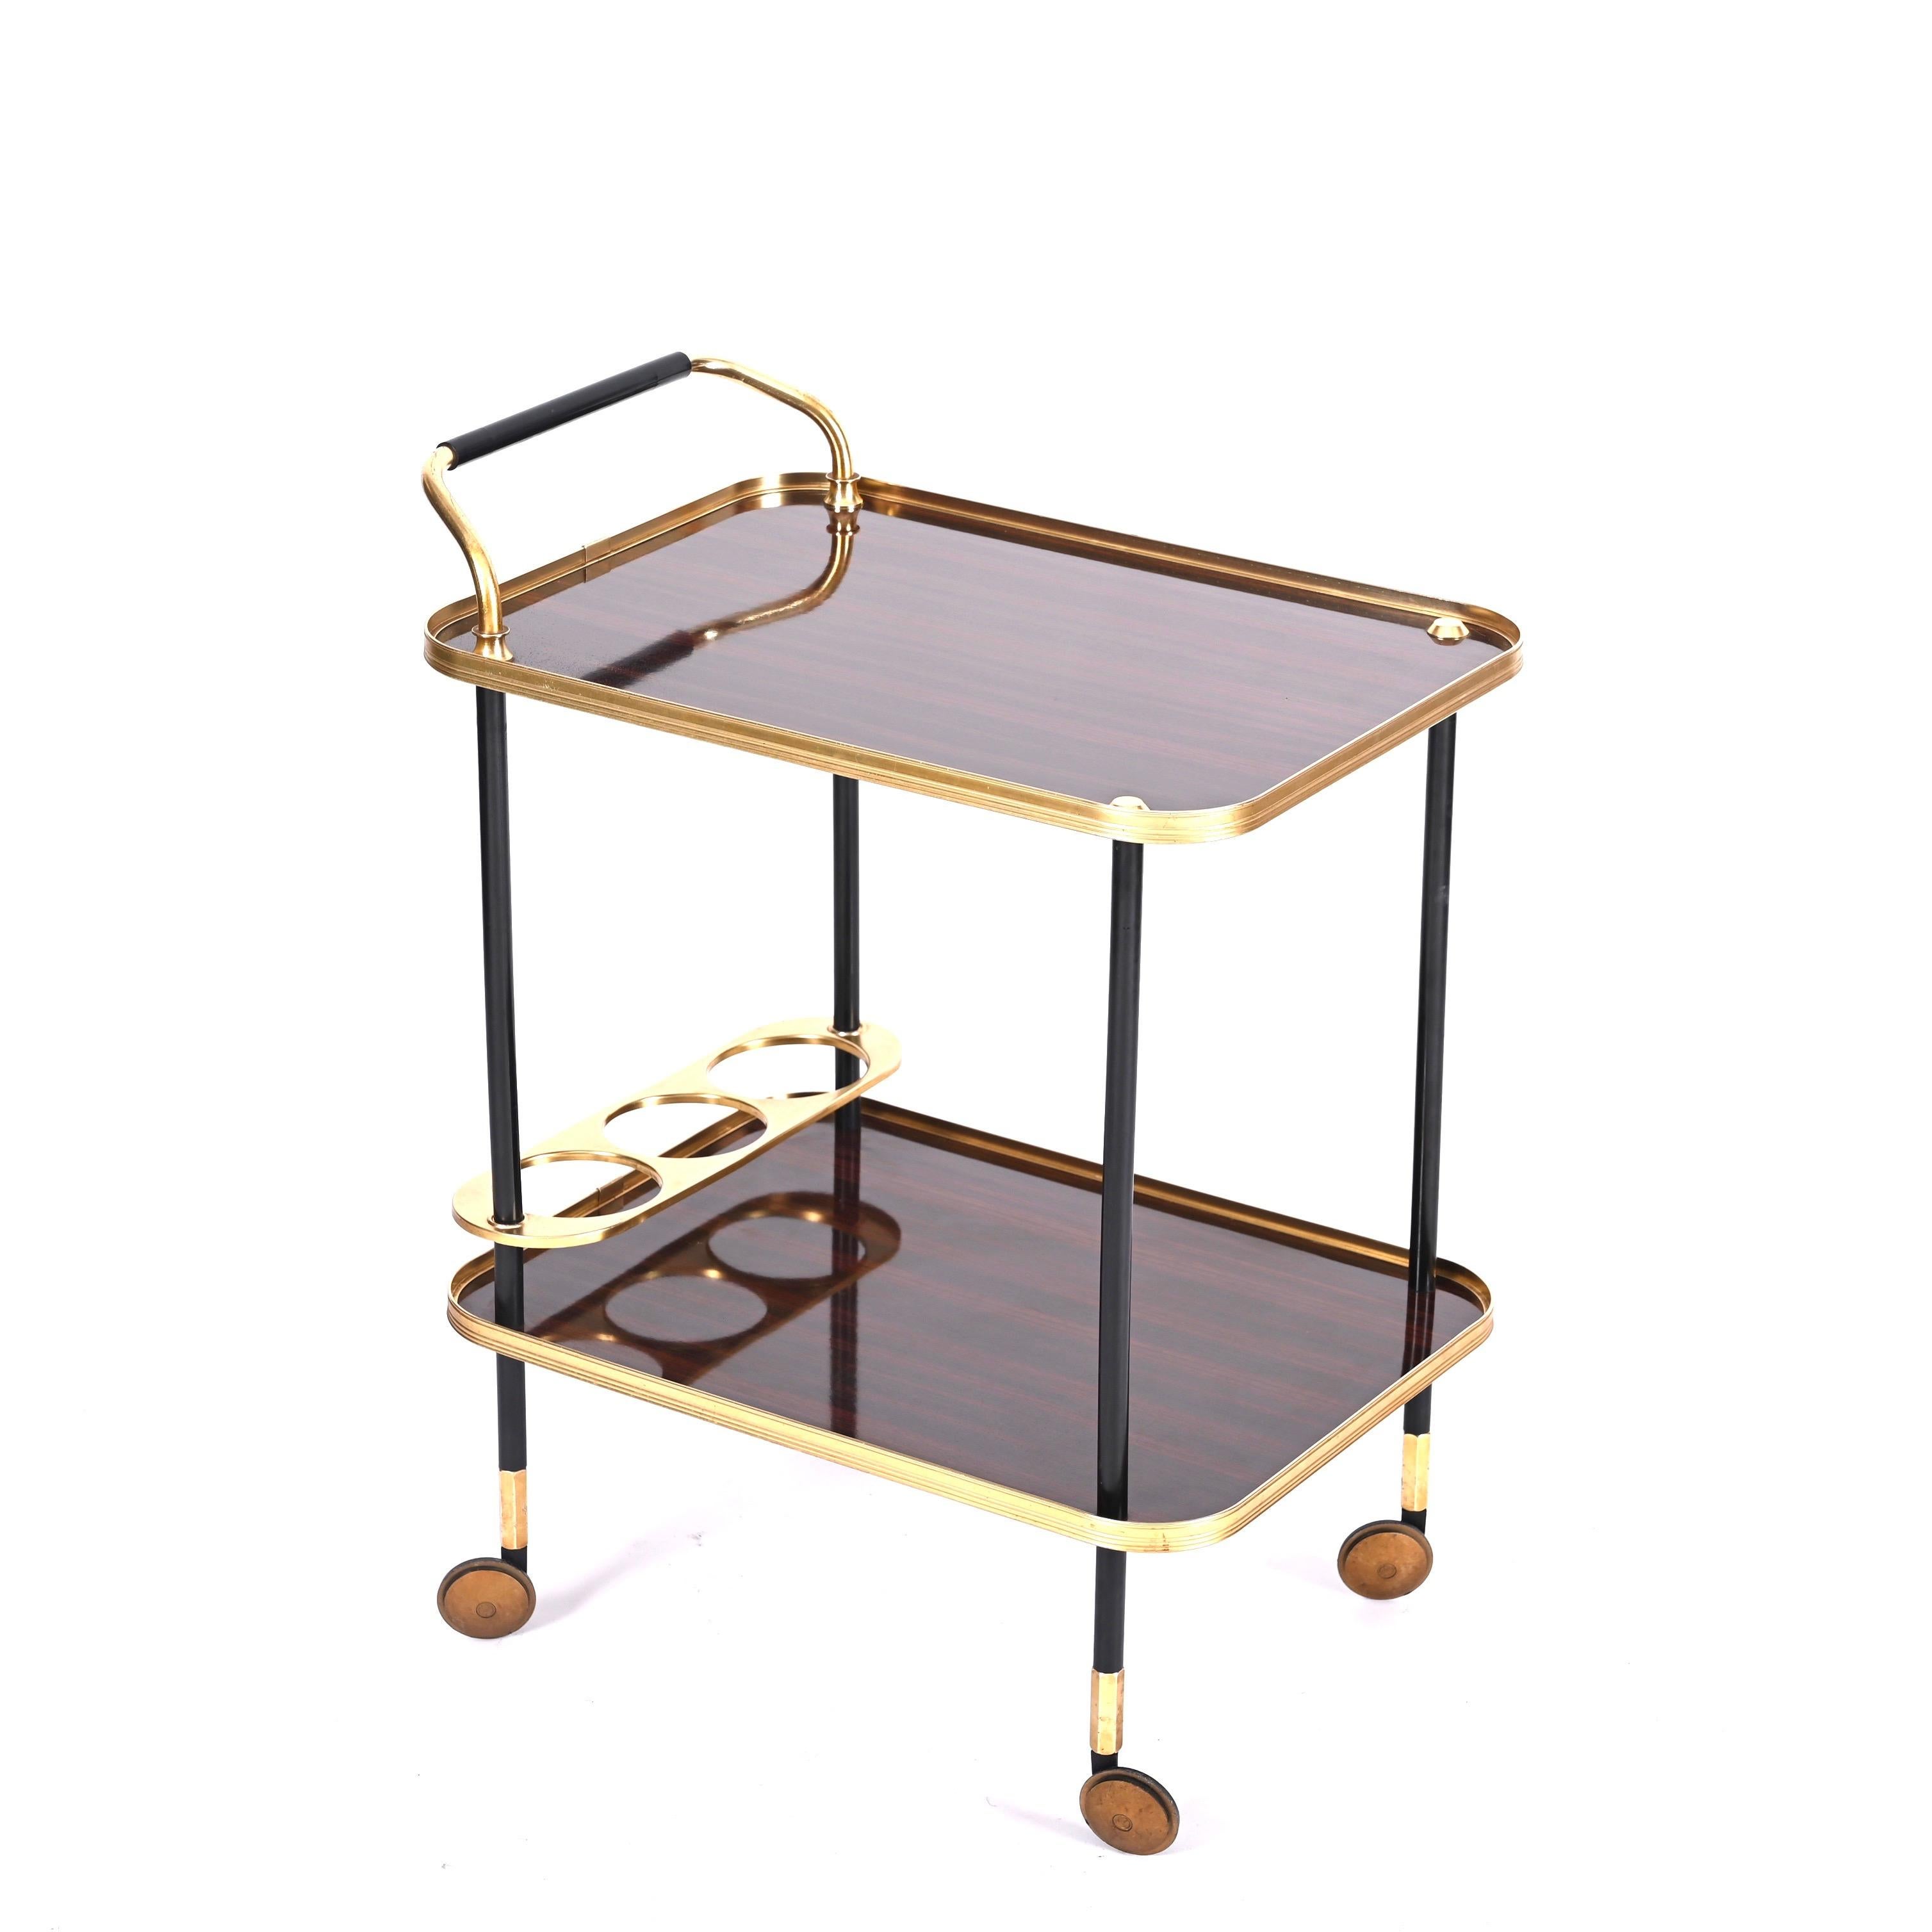 Fantastic midcentury serving cart, designed by Ico and Luisa Parisi for MB Italia in the 1960s. 

This stunning two level bar trolley features a structure made in golden metal and black laquered aluminium, the trays are made in a gorgeous formica